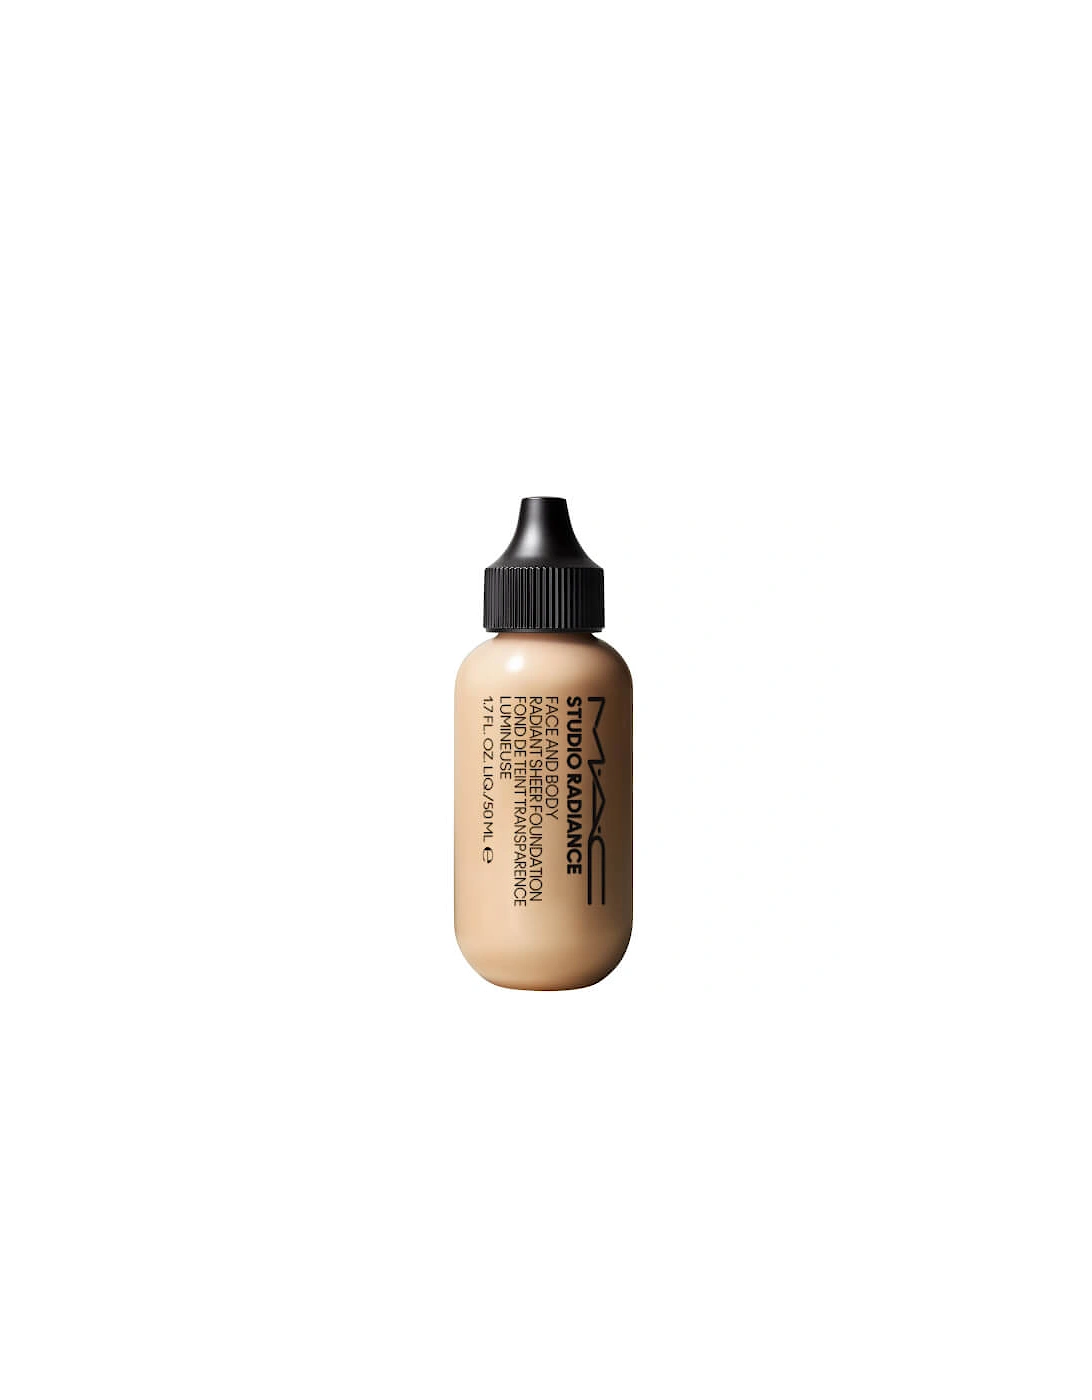 Studio Face and Body Radiant Sheer Foundation - C1, 2 of 1